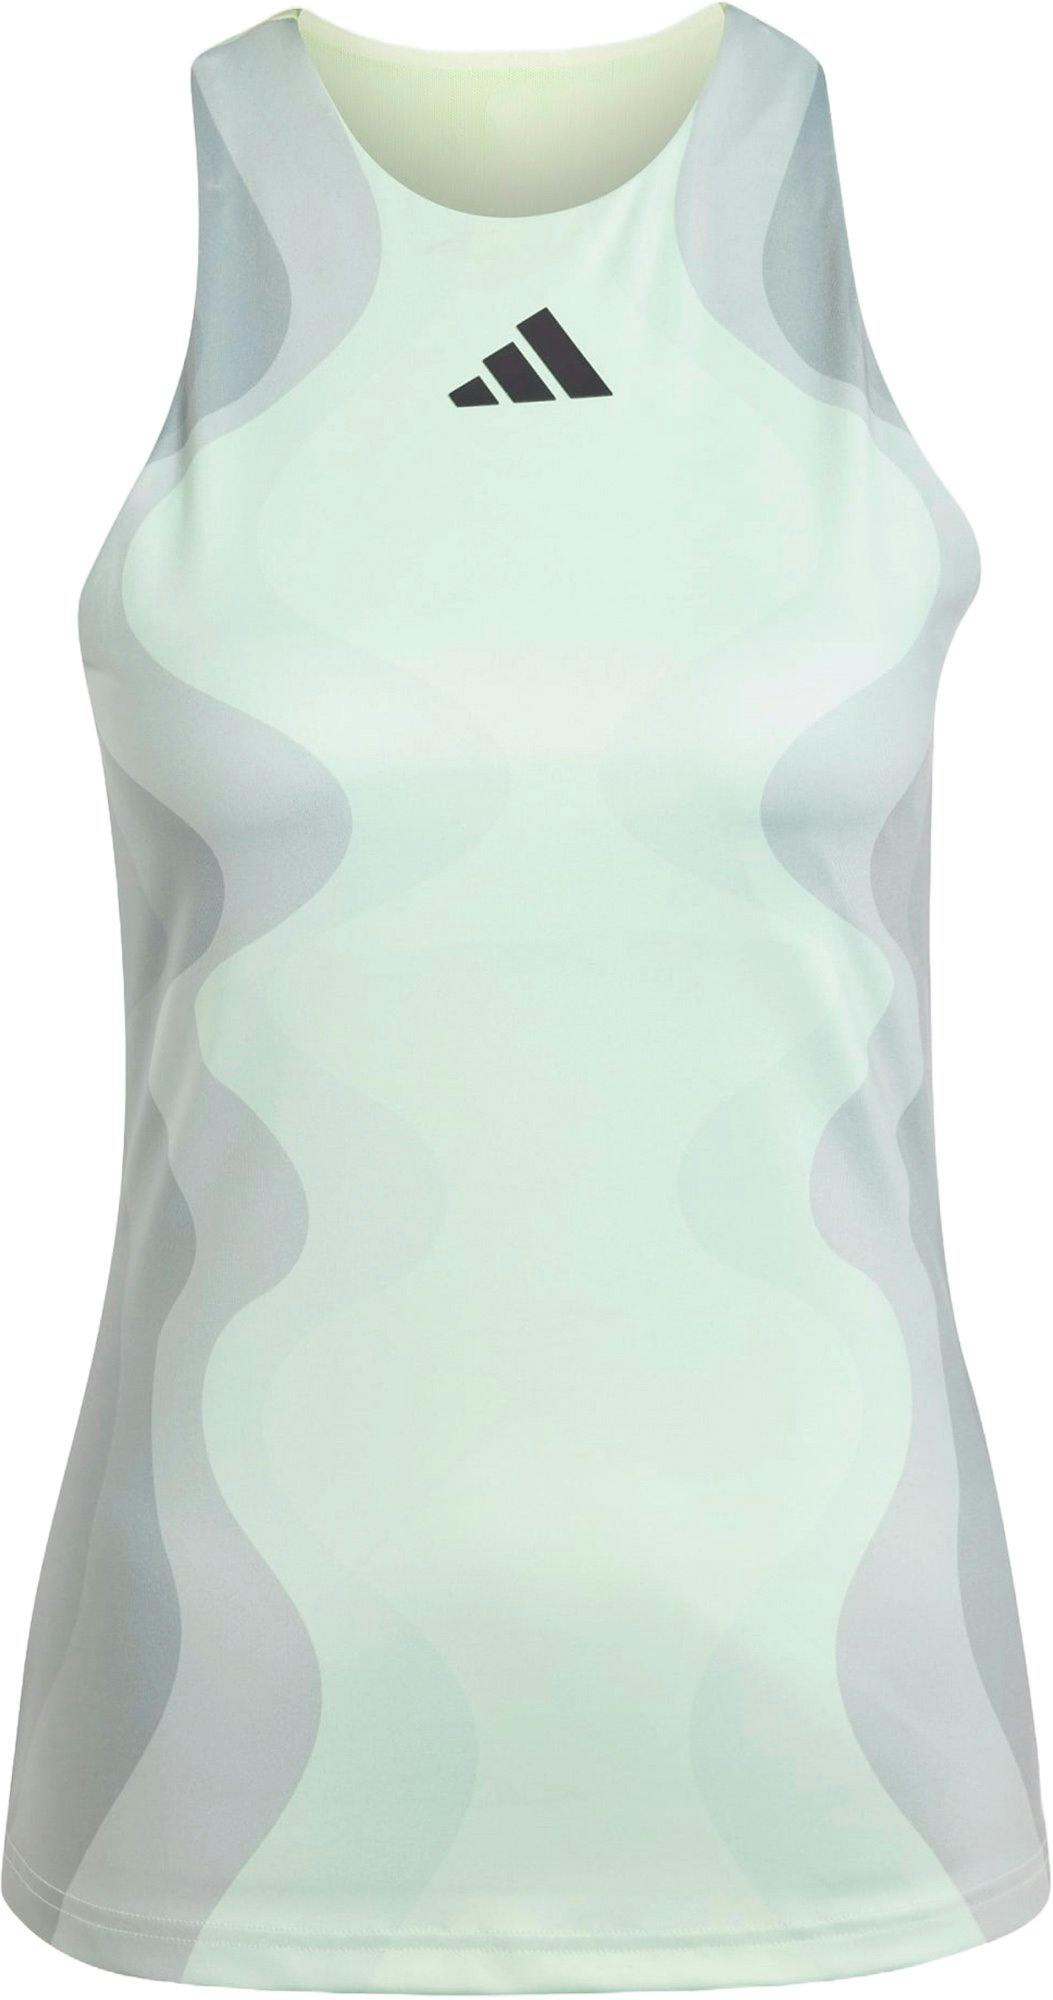 Product image for Tennis Heat.RDY Pro Y-Tank Top - Women's